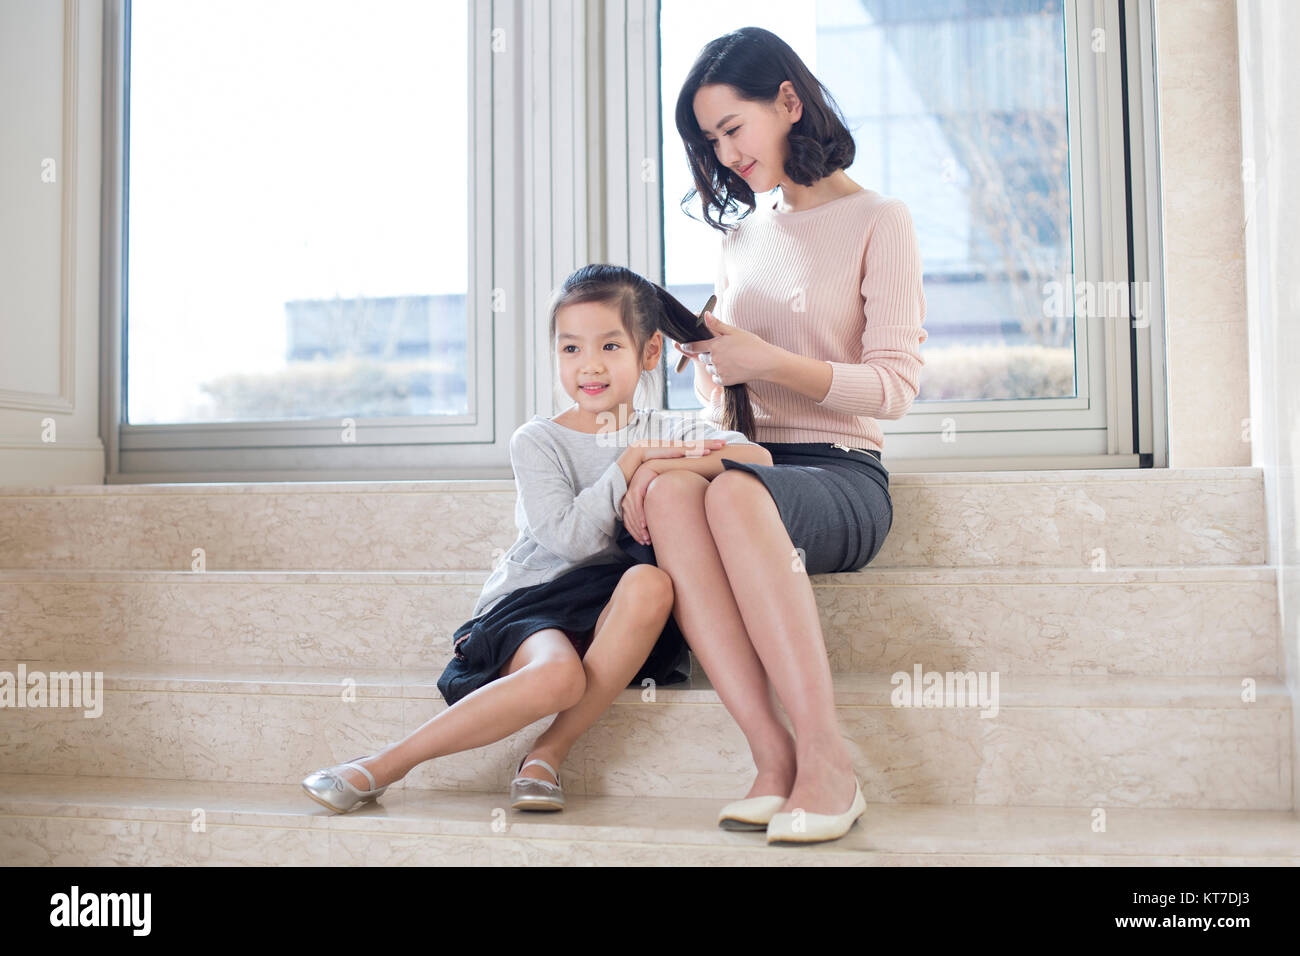 Young mother combing daughter's hair in the living room Stock Photo